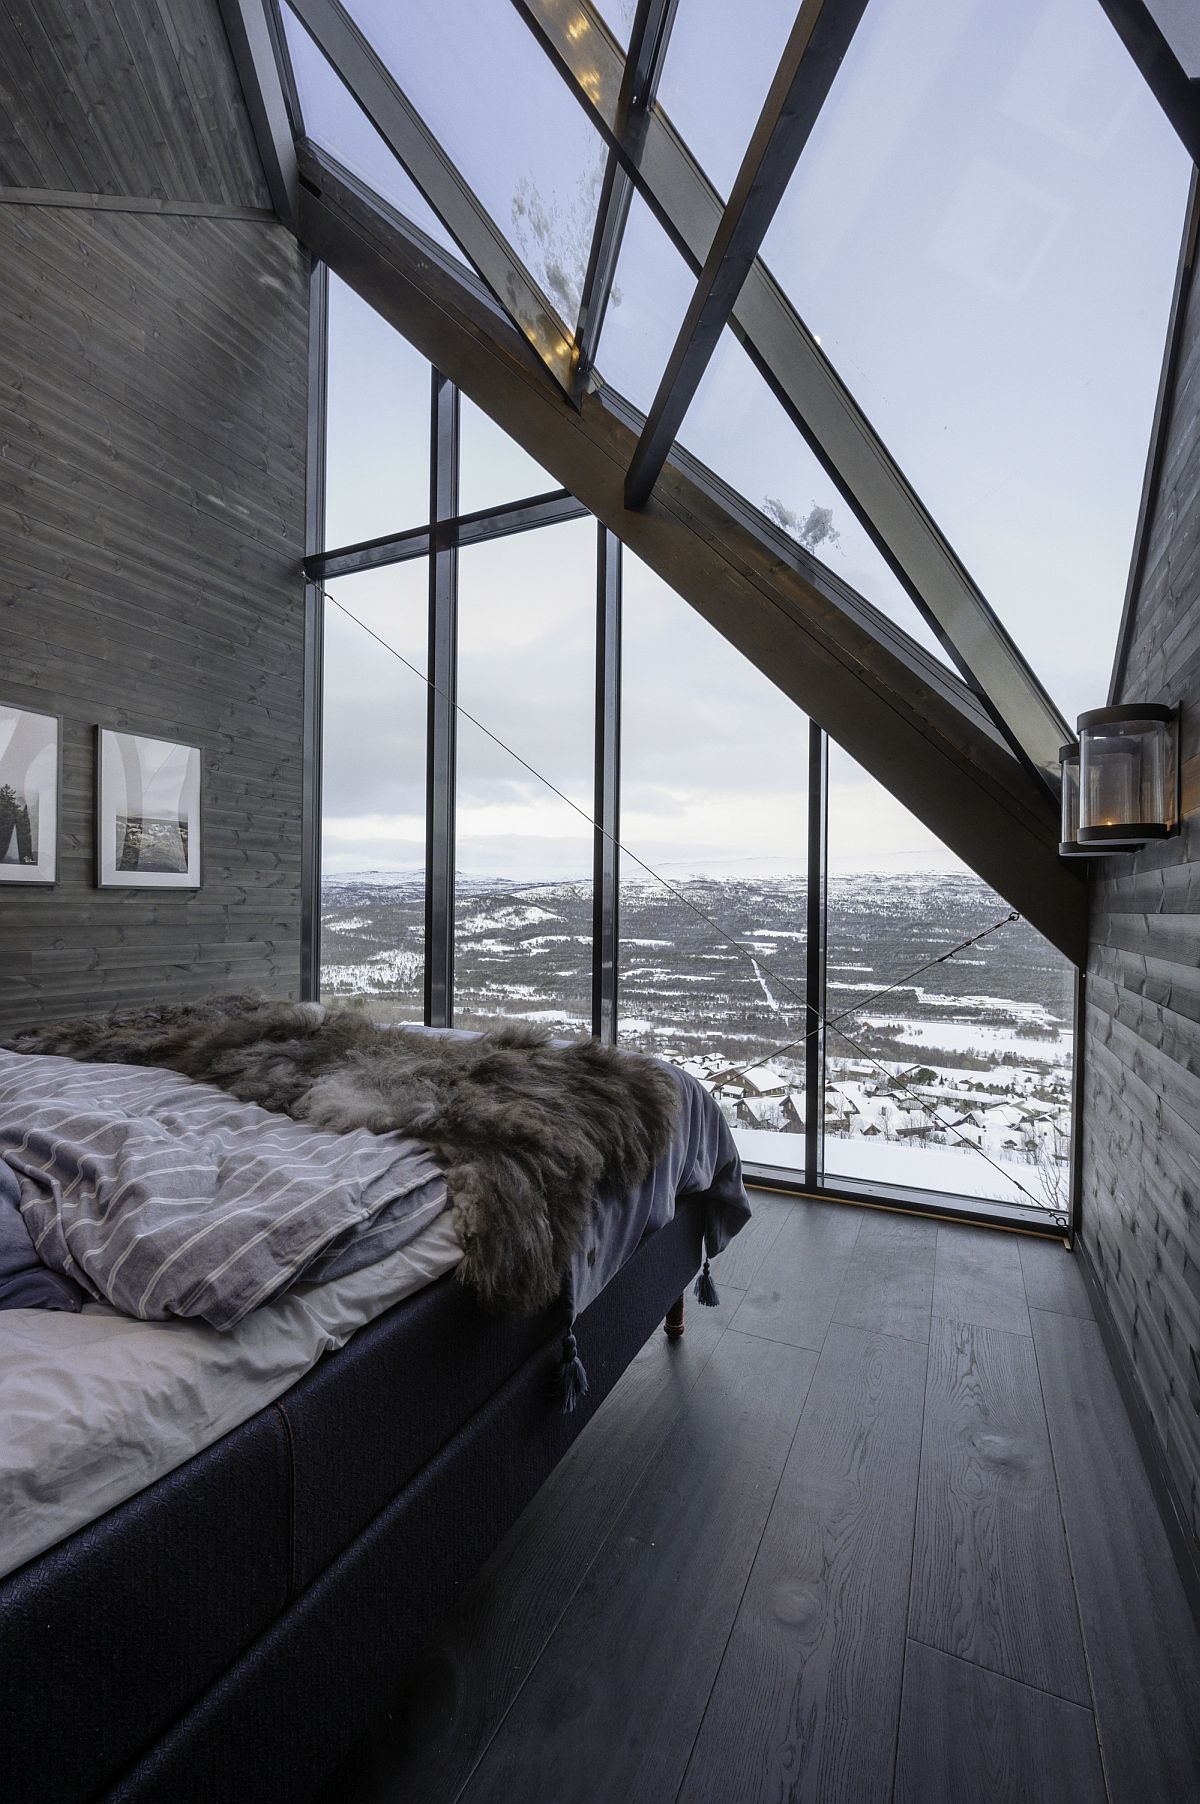 Bedroom of the Diamanten Cabin with amazing views of the mountains around it